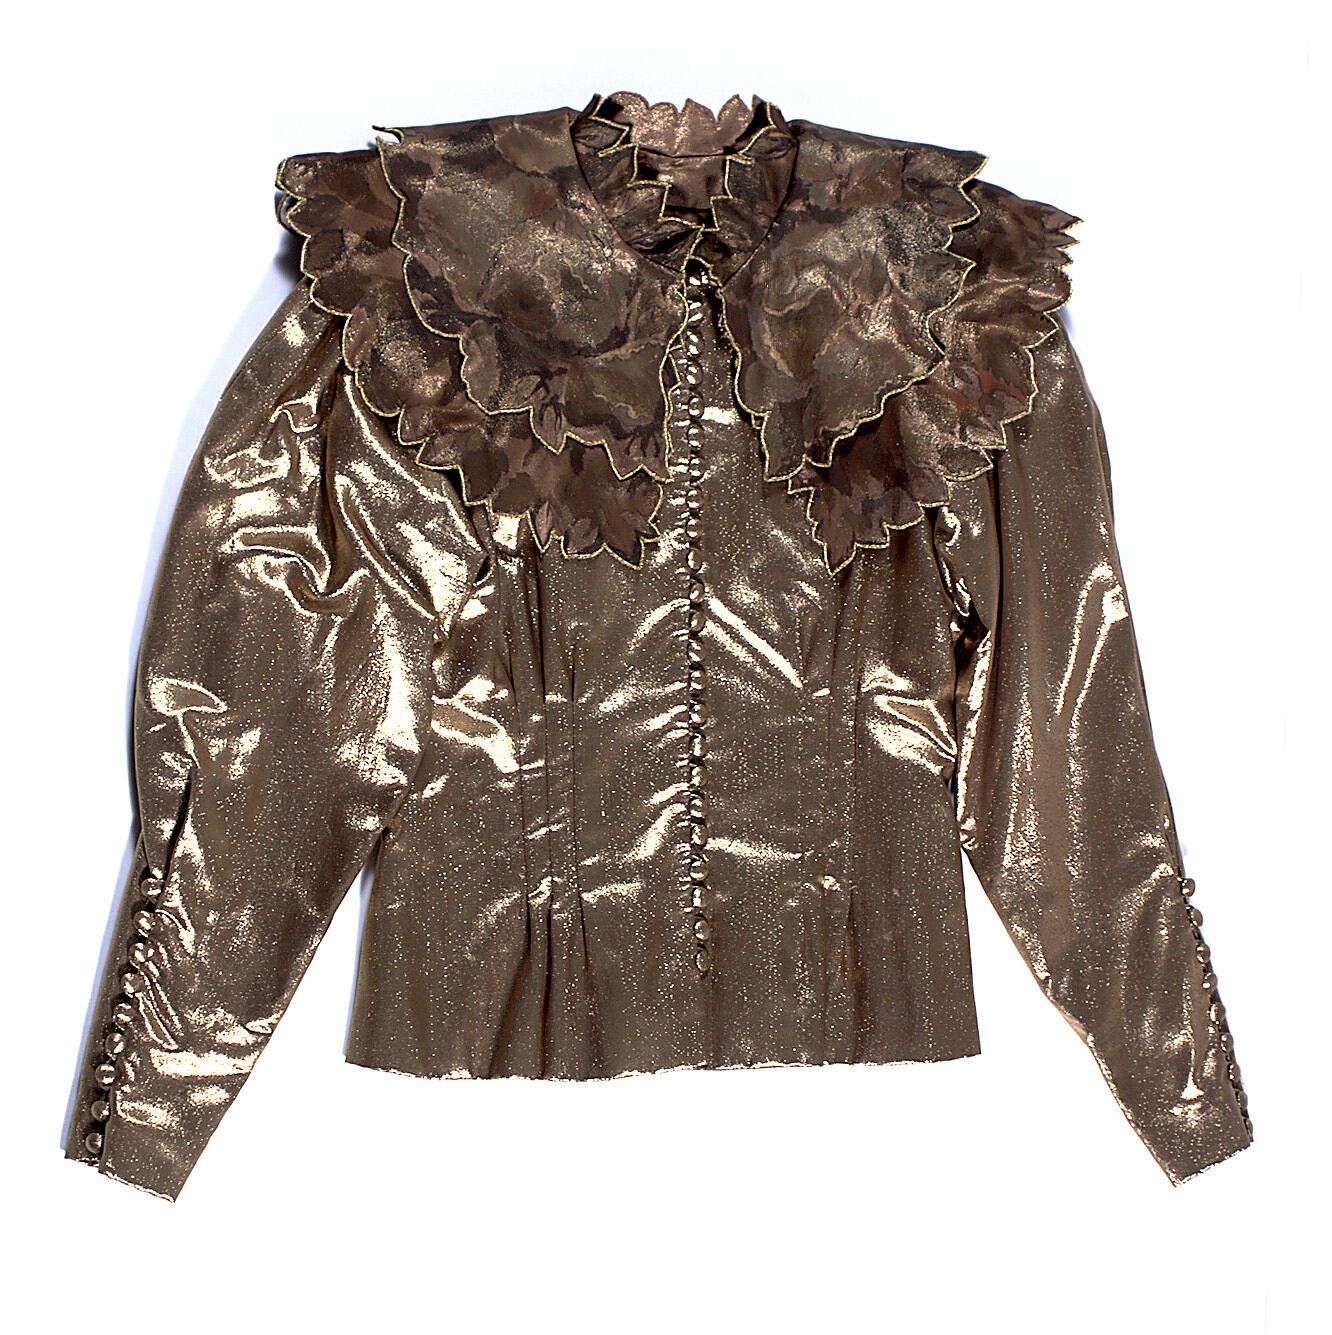 Jacket - Prue Acton, Gold Lame with Rose Collar, 1980